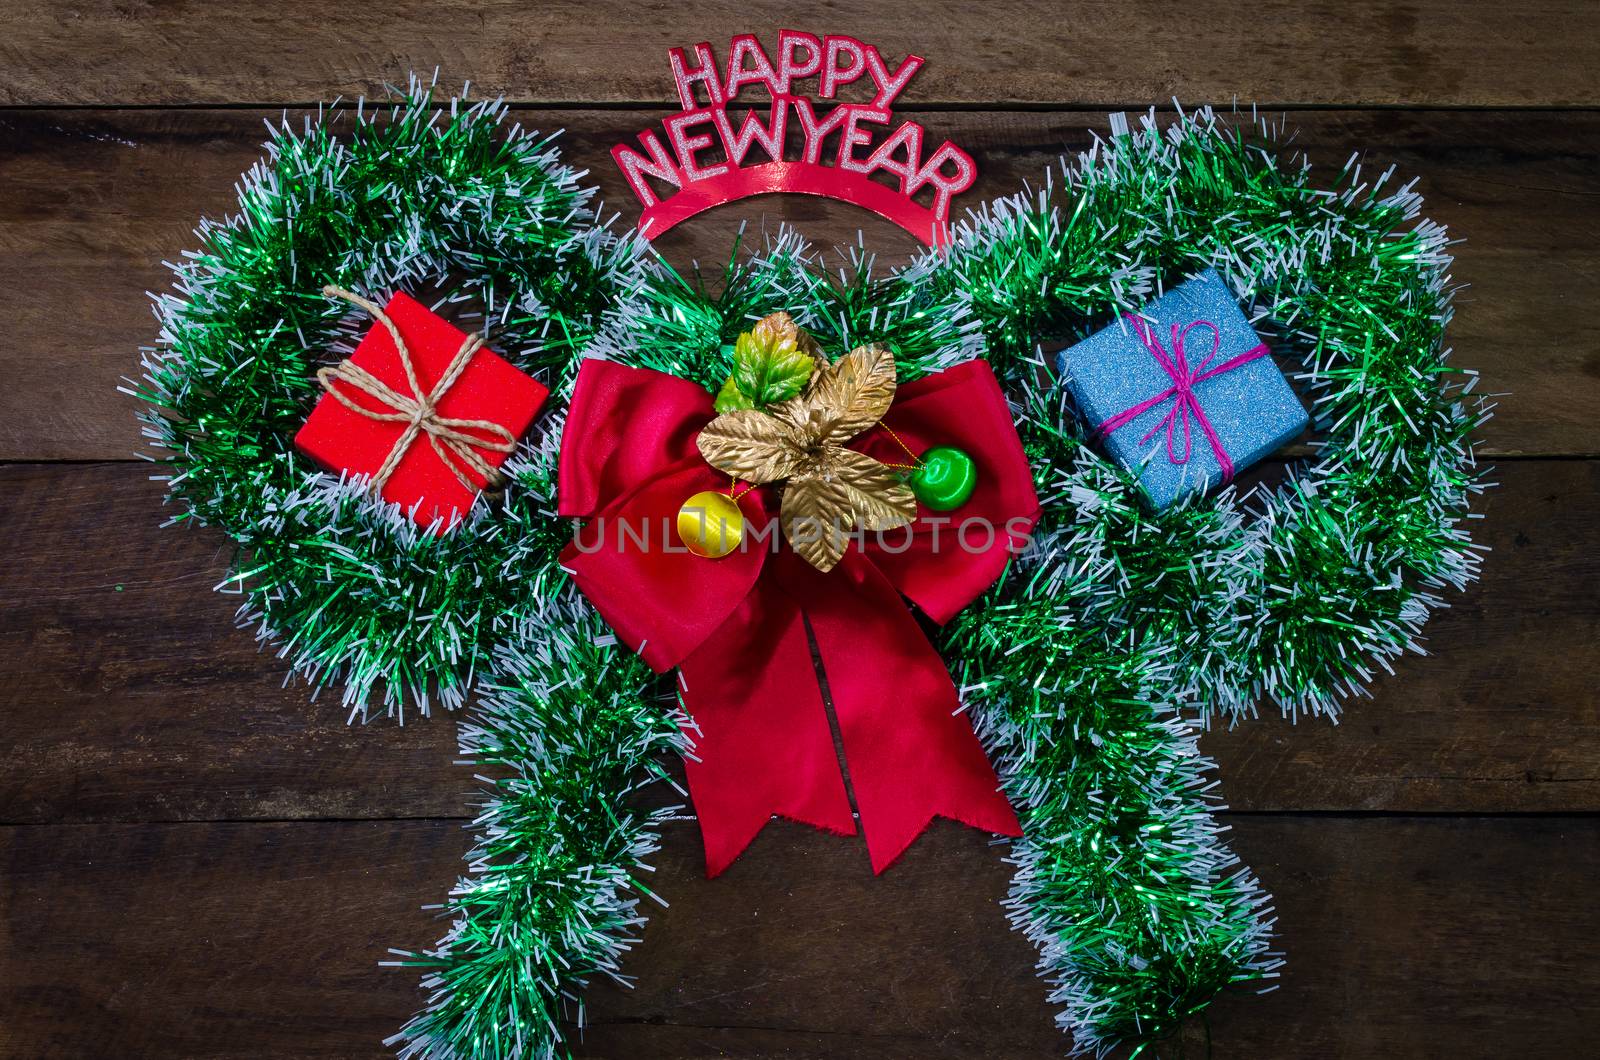 happy New Year message and gift box on wooden background. by photobyphotoboy